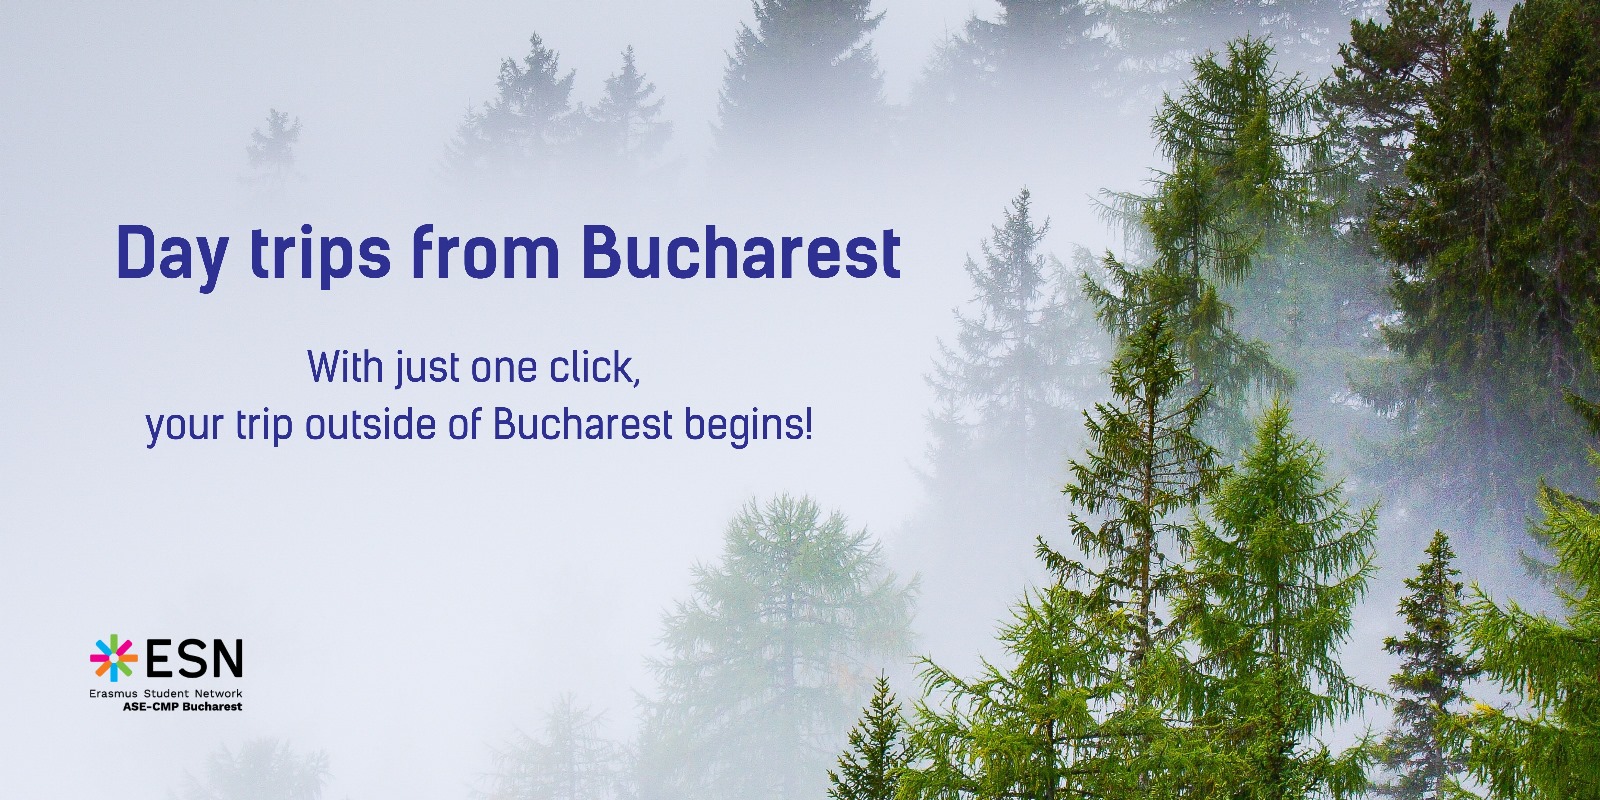 With just one click, your trip outside of Bucharest begins!